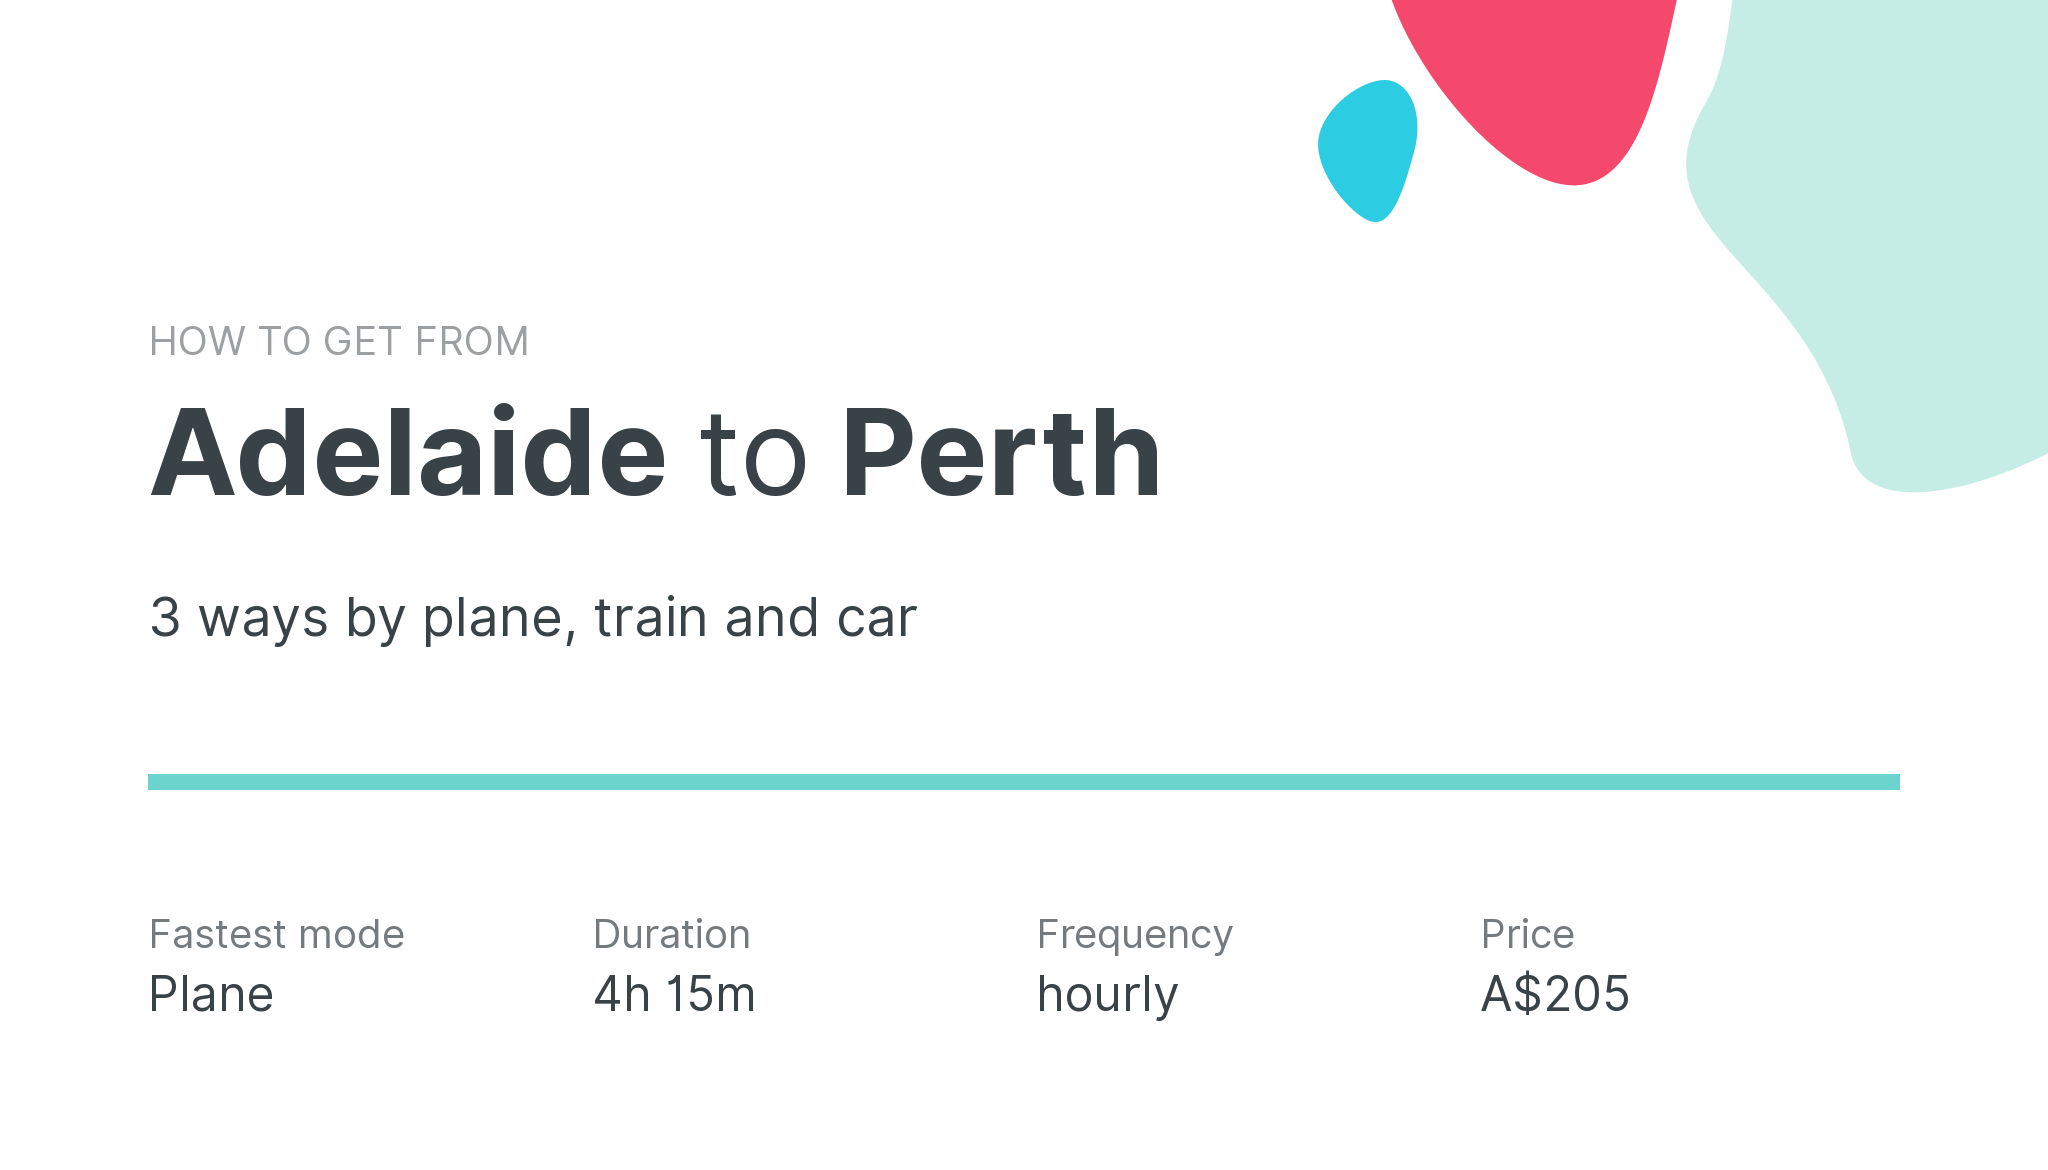 How do I get from Adelaide to Perth